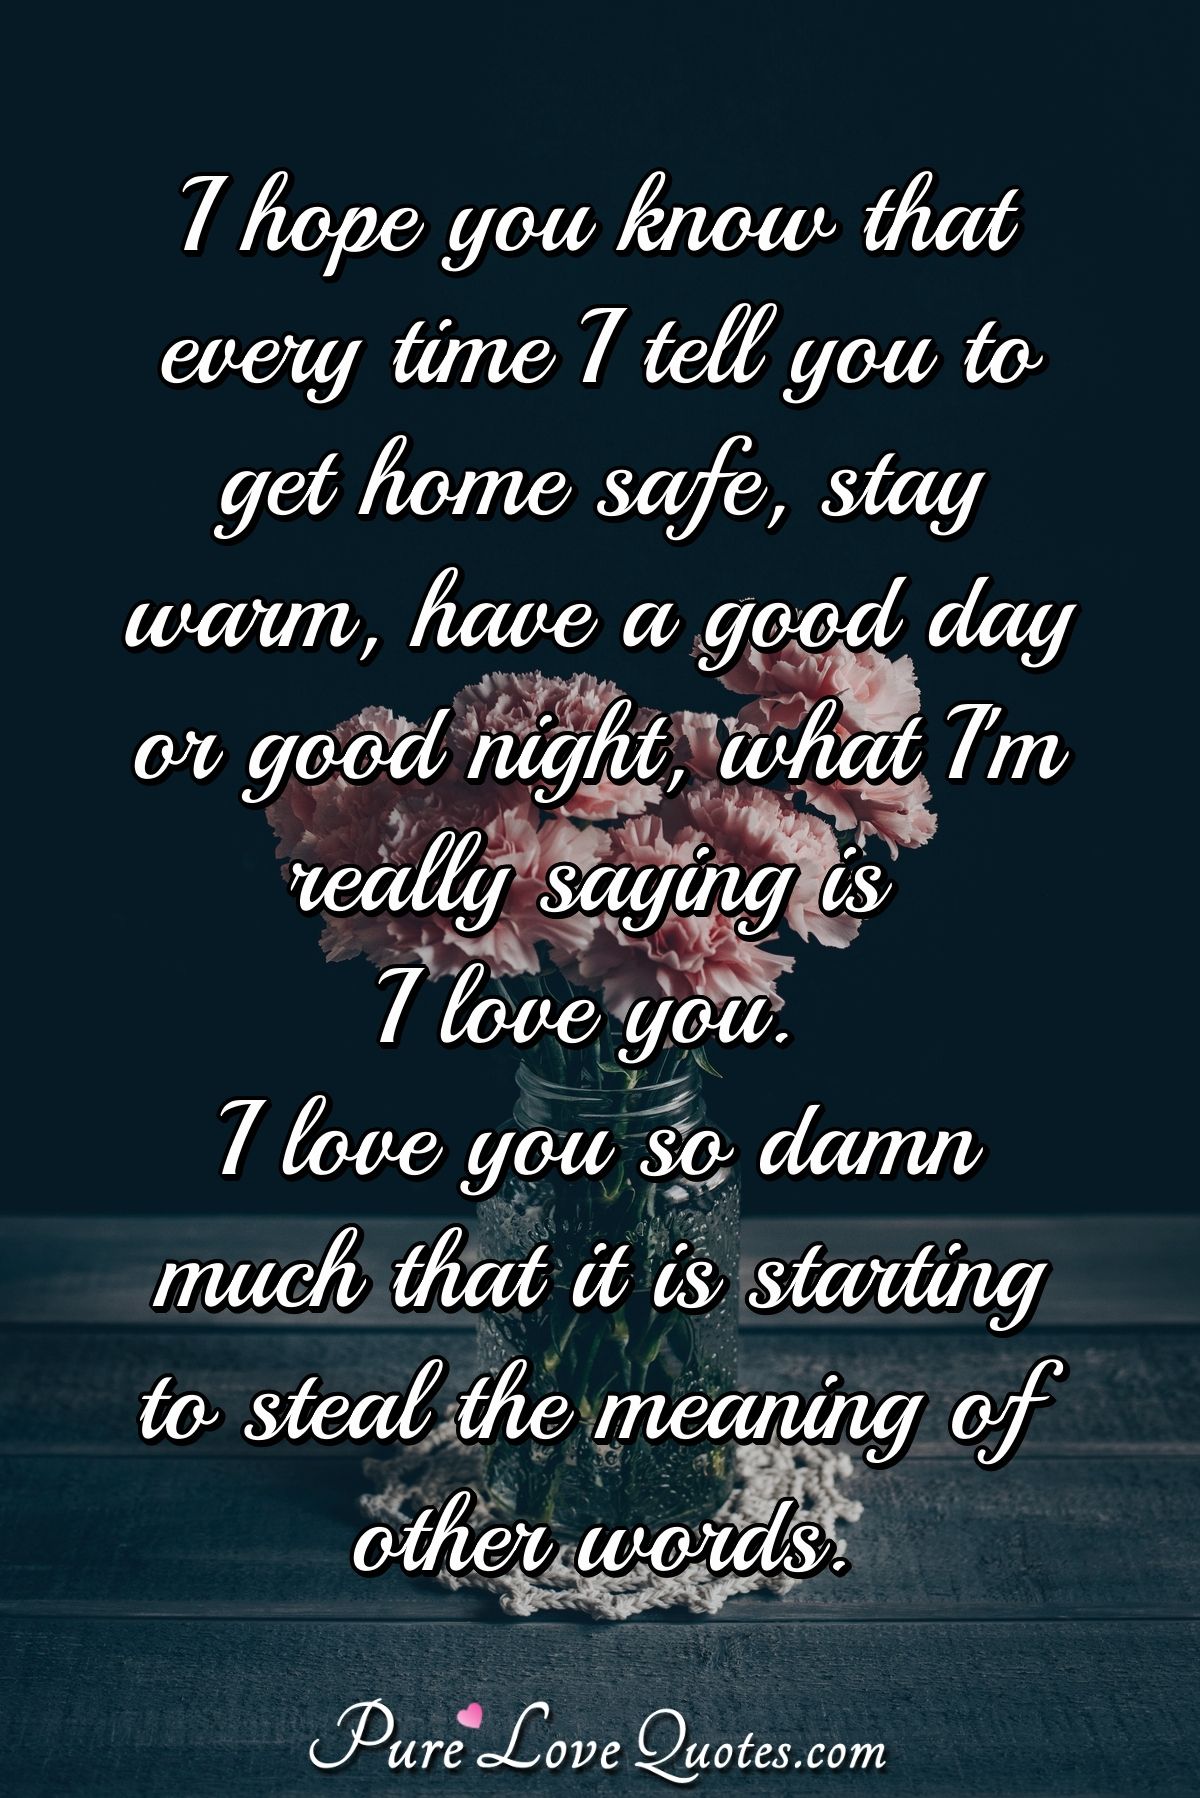 I hope you know that every time I tell you to get home safe, stay warm, have a good day or good night, what I'm really saying is I love you. I love you so damn much that it is starting to steal the meaning of other words. - Anonymous